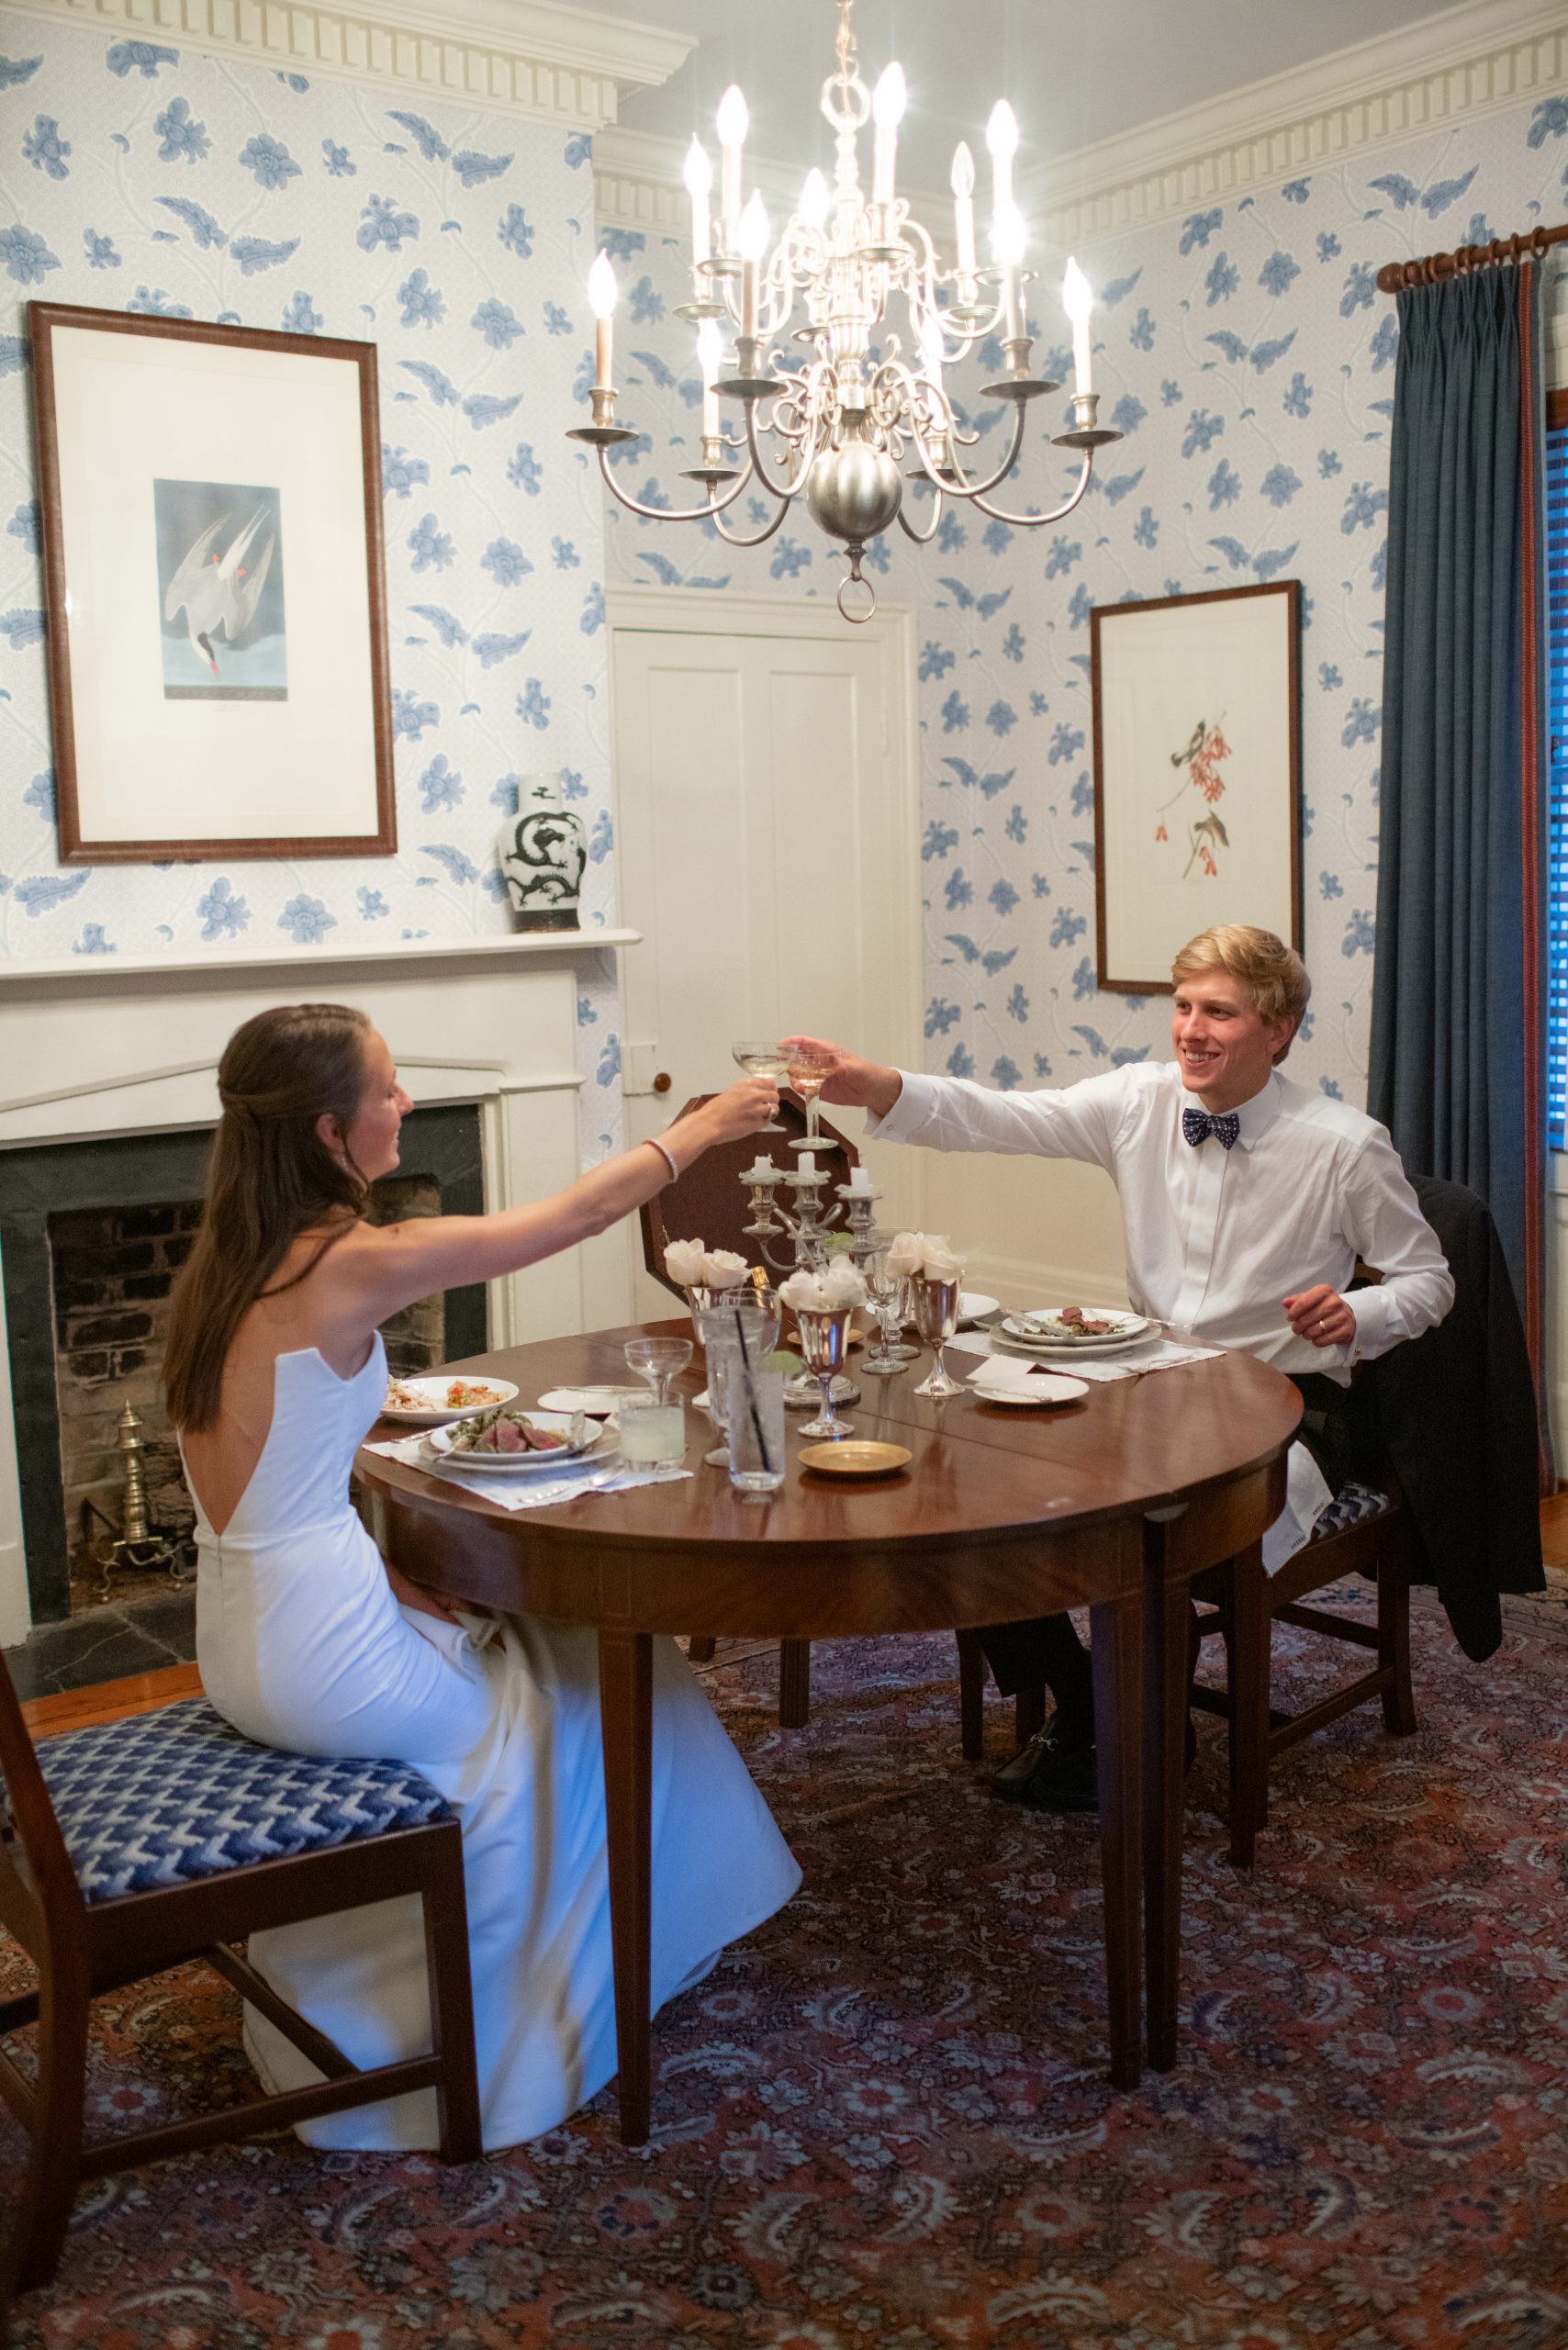 Emmy and Davis enjoyed their own private intimate dinner inside the Exchange dining room, sampling the menu. Emily surprised her daughter with a table set with family china, silver, and crystal along with a place card with her new name. 